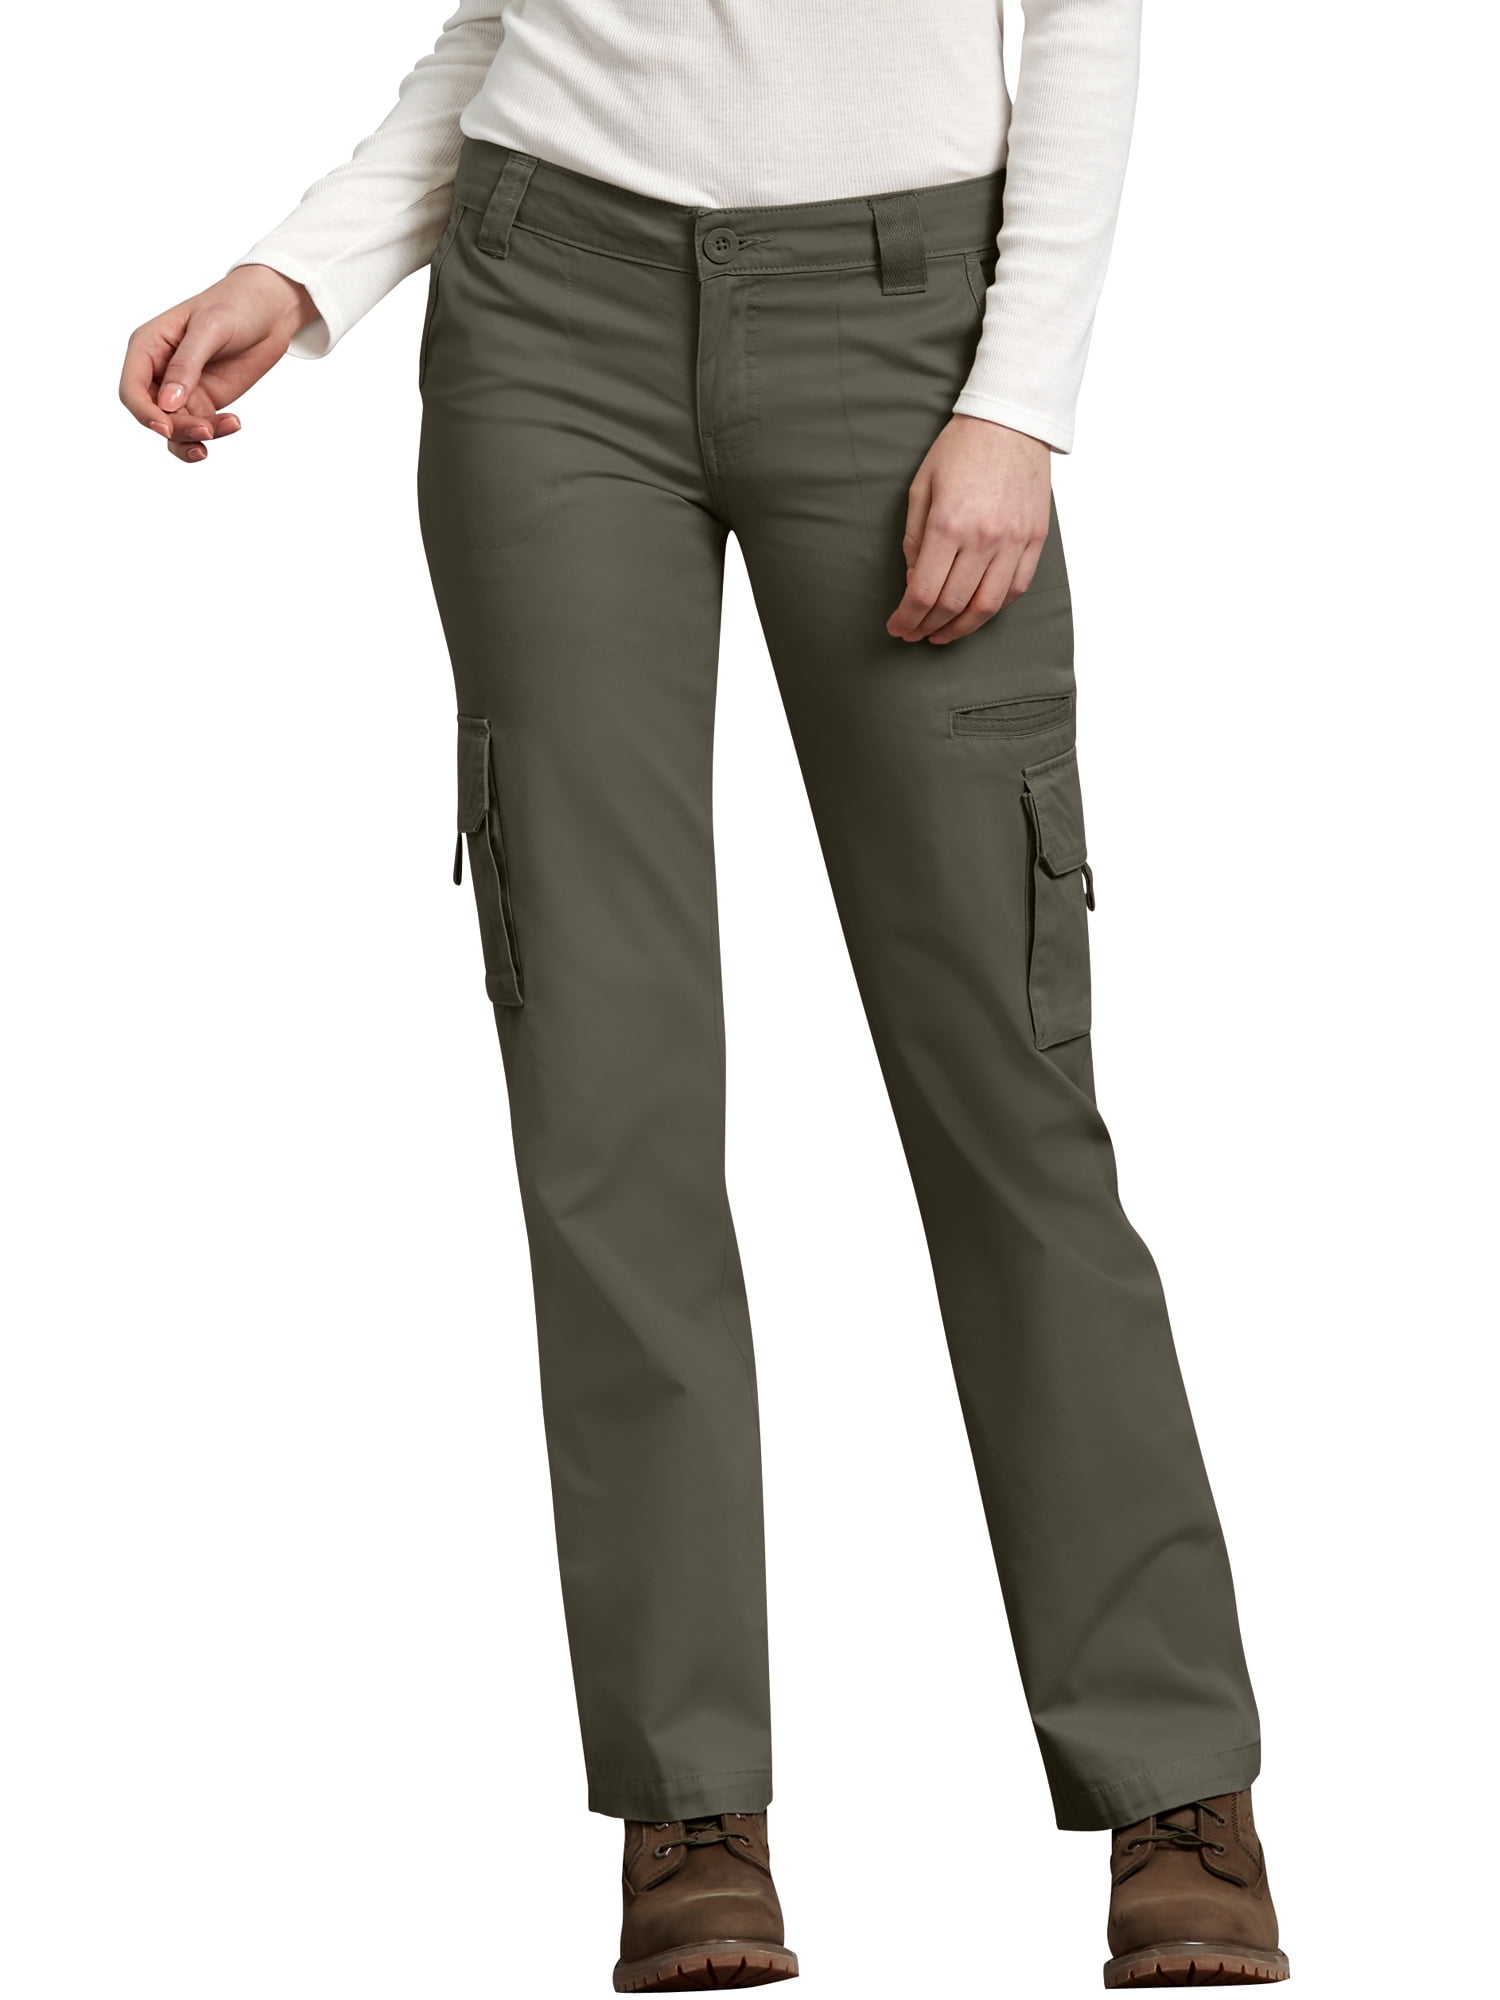 Best hot sale Women's Mid-Rise Straight Leg Chino Pants - A New